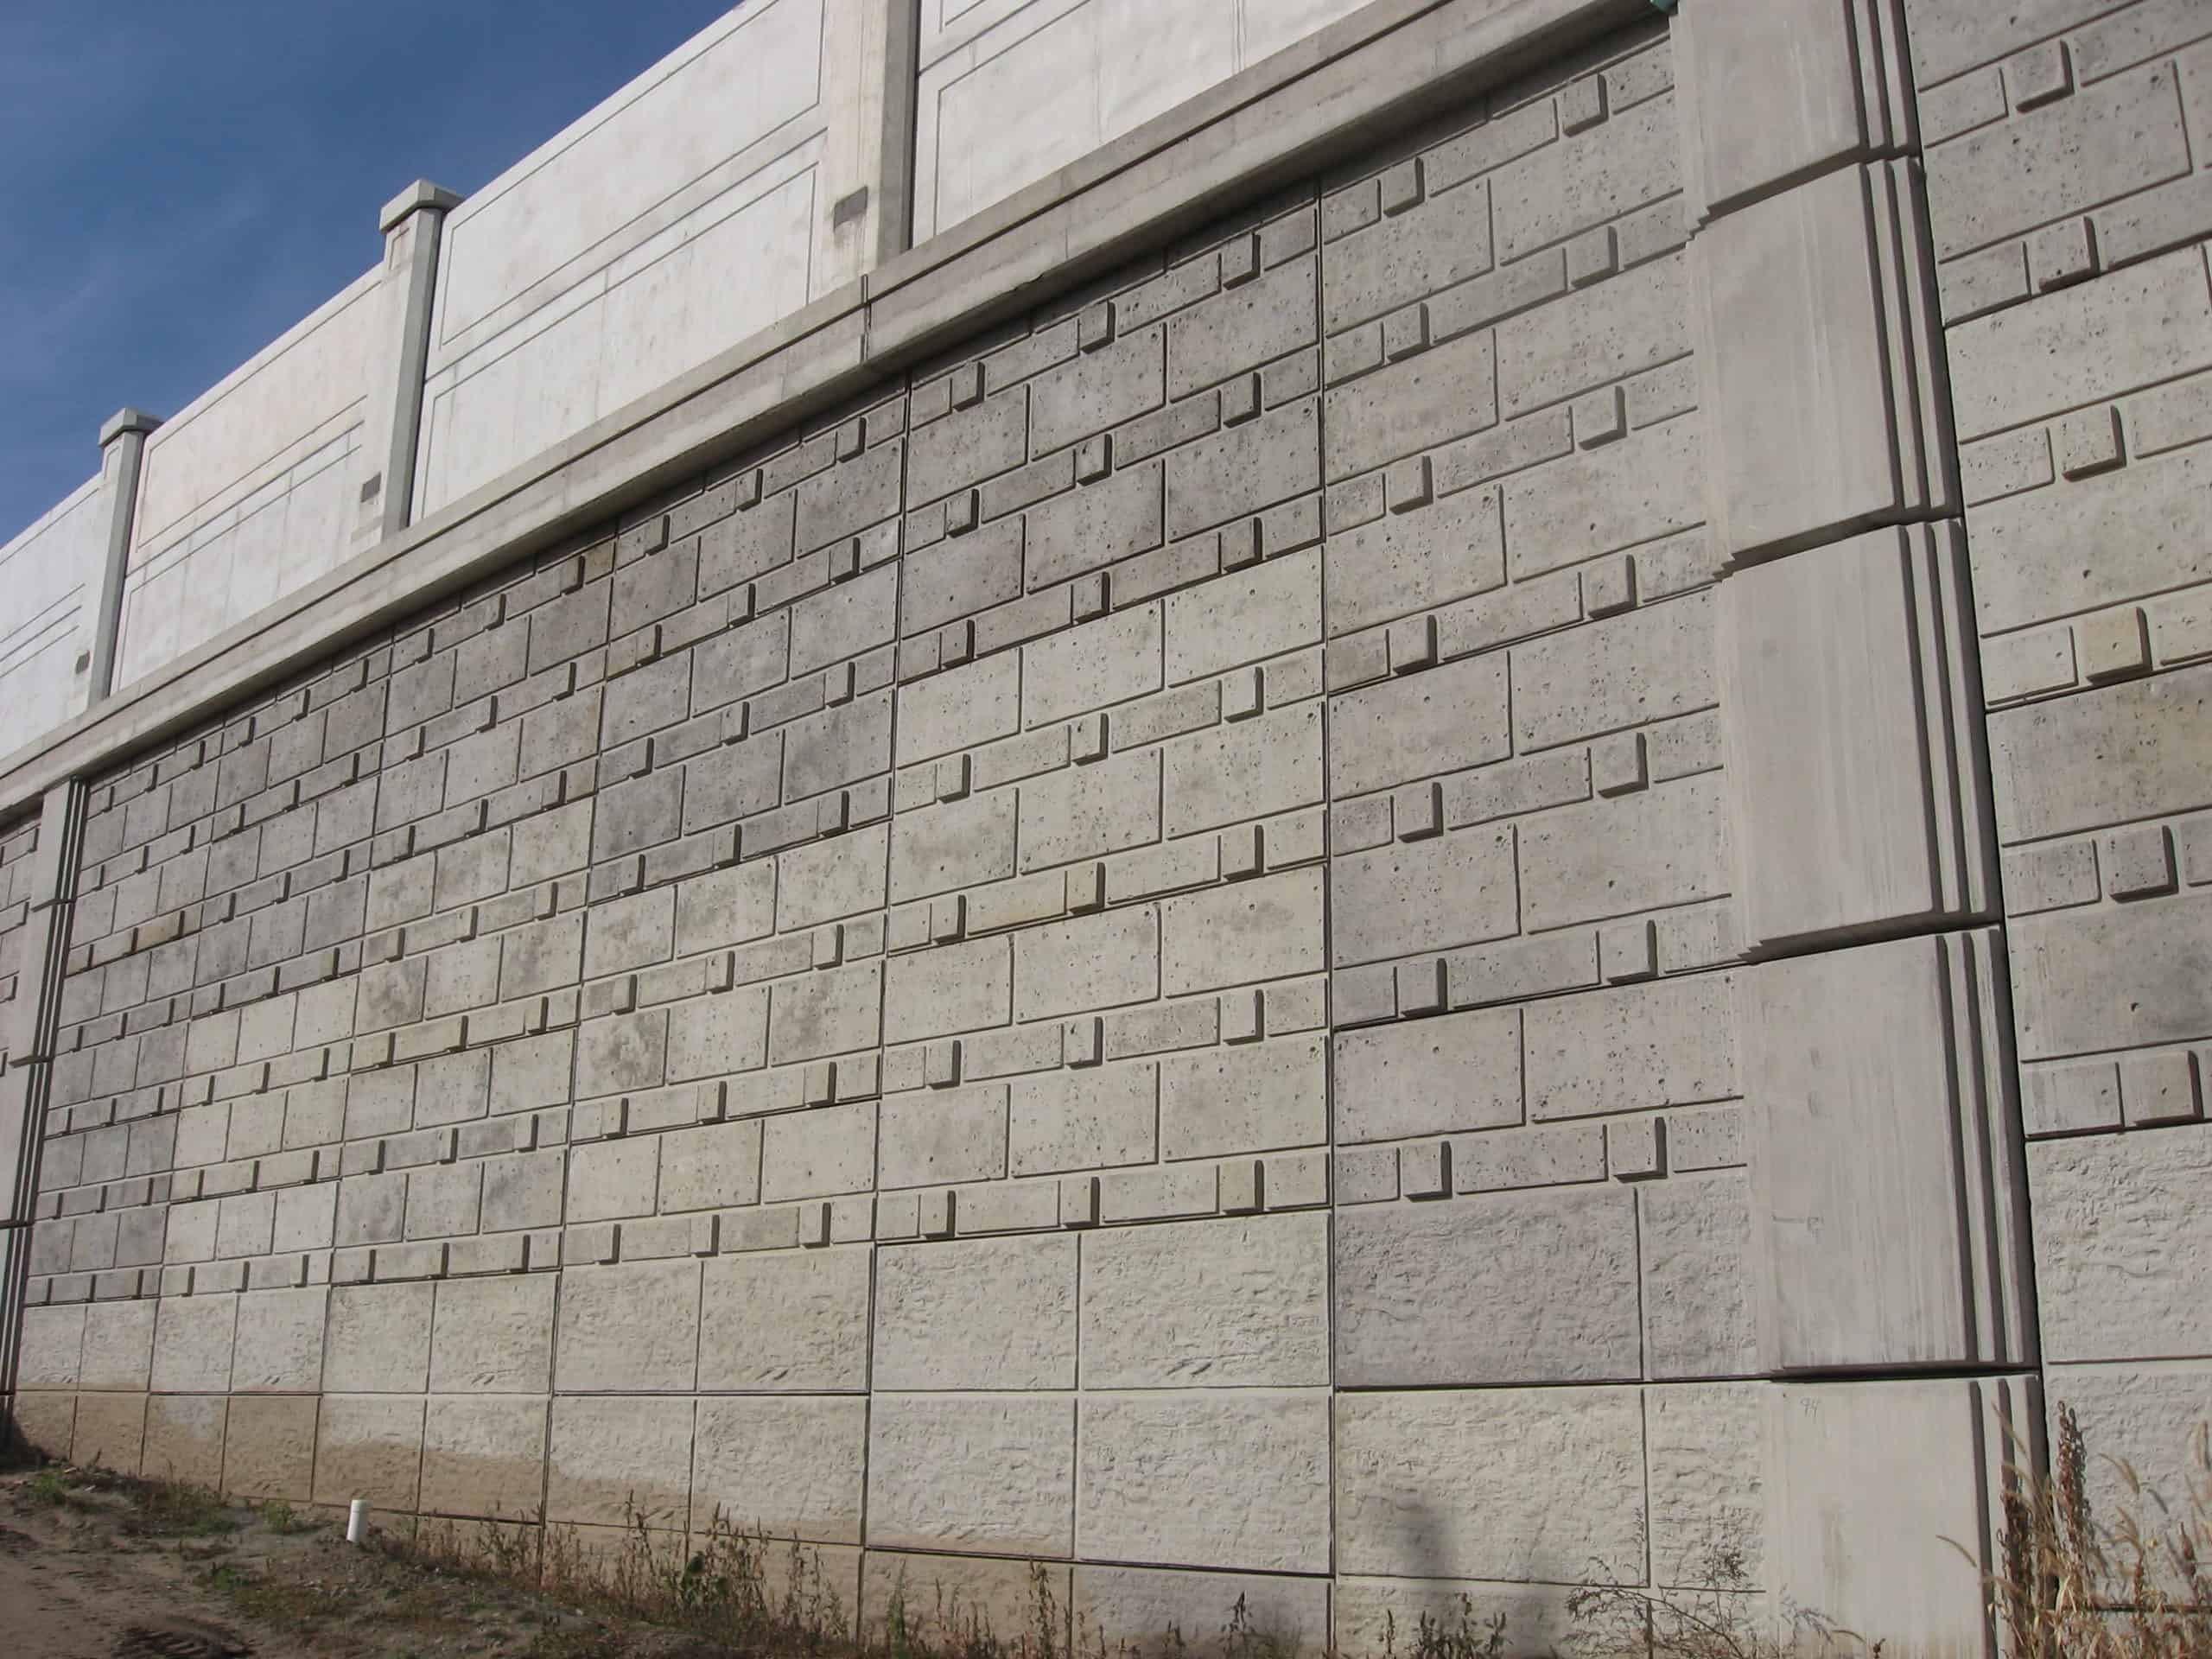 MnDOT MSE Retaining Wall by Wieser Concrete